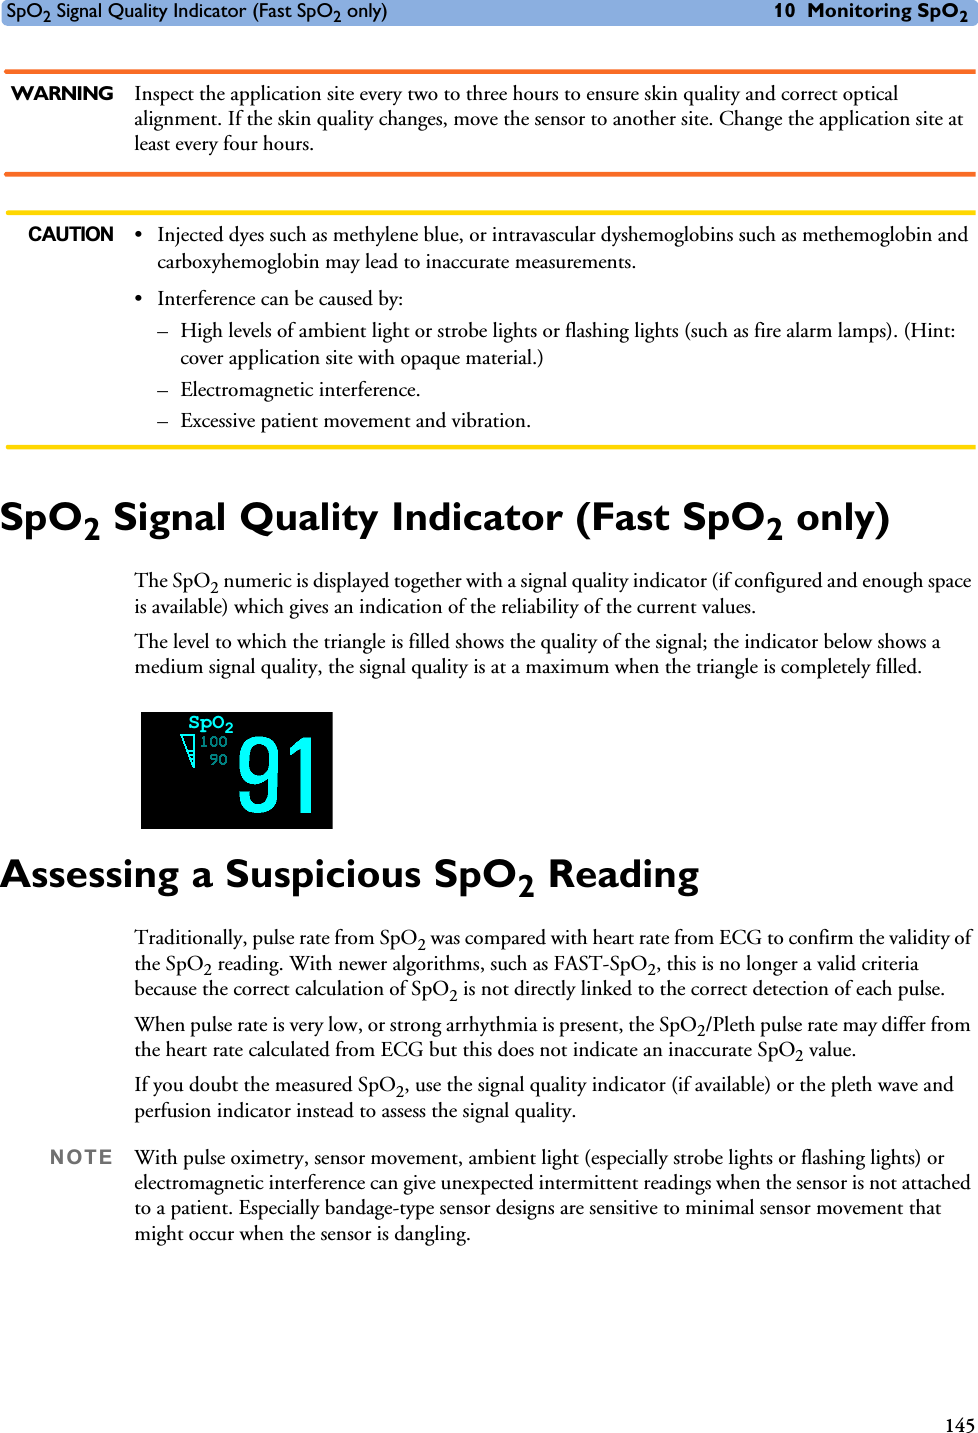 SpO2 Signal Quality Indicator (Fast SpO2 only) 10 Monitoring SpO2145WARNING Inspect the application site every two to three hours to ensure skin quality and correct optical alignment. If the skin quality changes, move the sensor to another site. Change the application site at least every four hours.CAUTION • Injected dyes such as methylene blue, or intravascular dyshemoglobins such as methemoglobin and carboxyhemoglobin may lead to inaccurate measurements.• Interference can be caused by:– High levels of ambient light or strobe lights or flashing lights (such as fire alarm lamps). (Hint: cover application site with opaque material.)– Electromagnetic interference.– Excessive patient movement and vibration.SpO2 Signal Quality Indicator (Fast SpO2 only)The SpO2 numeric is displayed together with a signal quality indicator (if configured and enough space is available) which gives an indication of the reliability of the current values. The level to which the triangle is filled shows the quality of the signal; the indicator below shows a medium signal quality, the signal quality is at a maximum when the triangle is completely filled.Assessing a Suspicious SpO2 ReadingTraditionally, pulse rate from SpO2 was compared with heart rate from ECG to confirm the validity of the SpO2 reading. With newer algorithms, such as FAST-SpO2, this is no longer a valid criteria because the correct calculation of SpO2 is not directly linked to the correct detection of each pulse. When pulse rate is very low, or strong arrhythmia is present, the SpO2/Pleth pulse rate may differ from the heart rate calculated from ECG but this does not indicate an inaccurate SpO2 value.If you doubt the measured SpO2, use the signal quality indicator (if available) or the pleth wave and perfusion indicator instead to assess the signal quality.NOTE With pulse oximetry, sensor movement, ambient light (especially strobe lights or flashing lights) or electromagnetic interference can give unexpected intermittent readings when the sensor is not attached to a patient. Especially bandage-type sensor designs are sensitive to minimal sensor movement that might occur when the sensor is dangling. SpO2